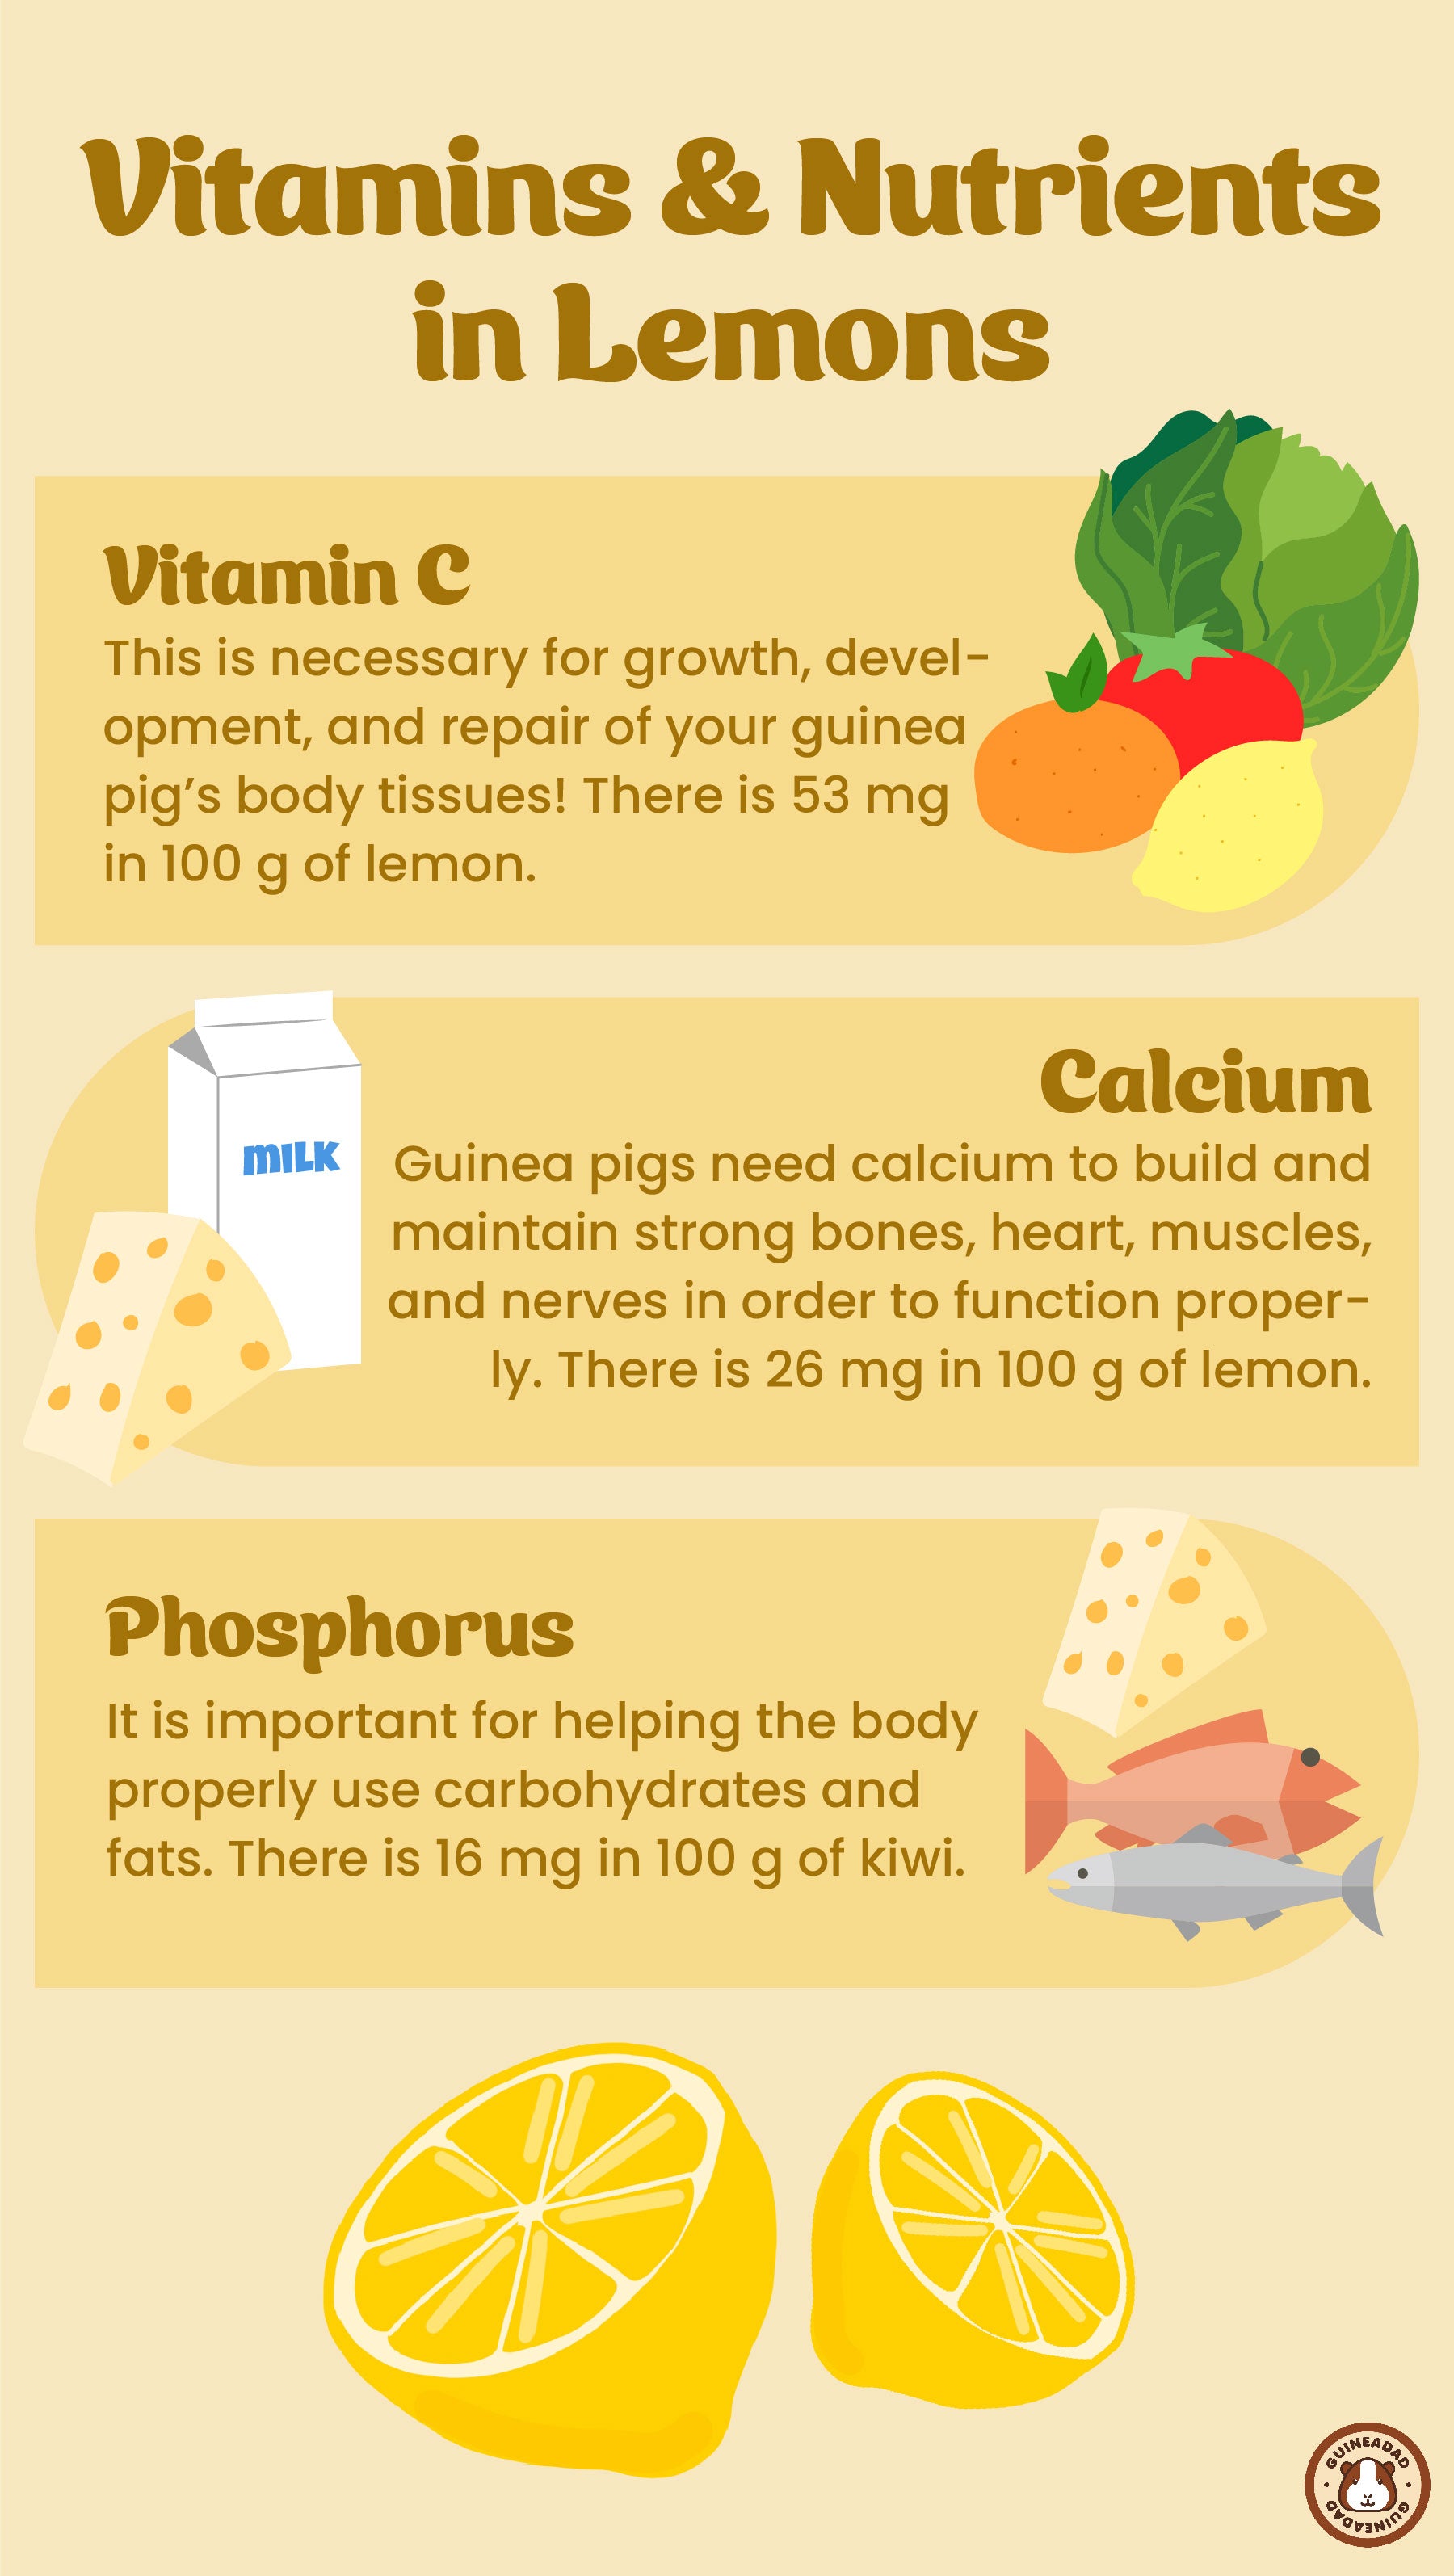 Infographic displaying the vitamins and nutrients in lemons for guinea pigs